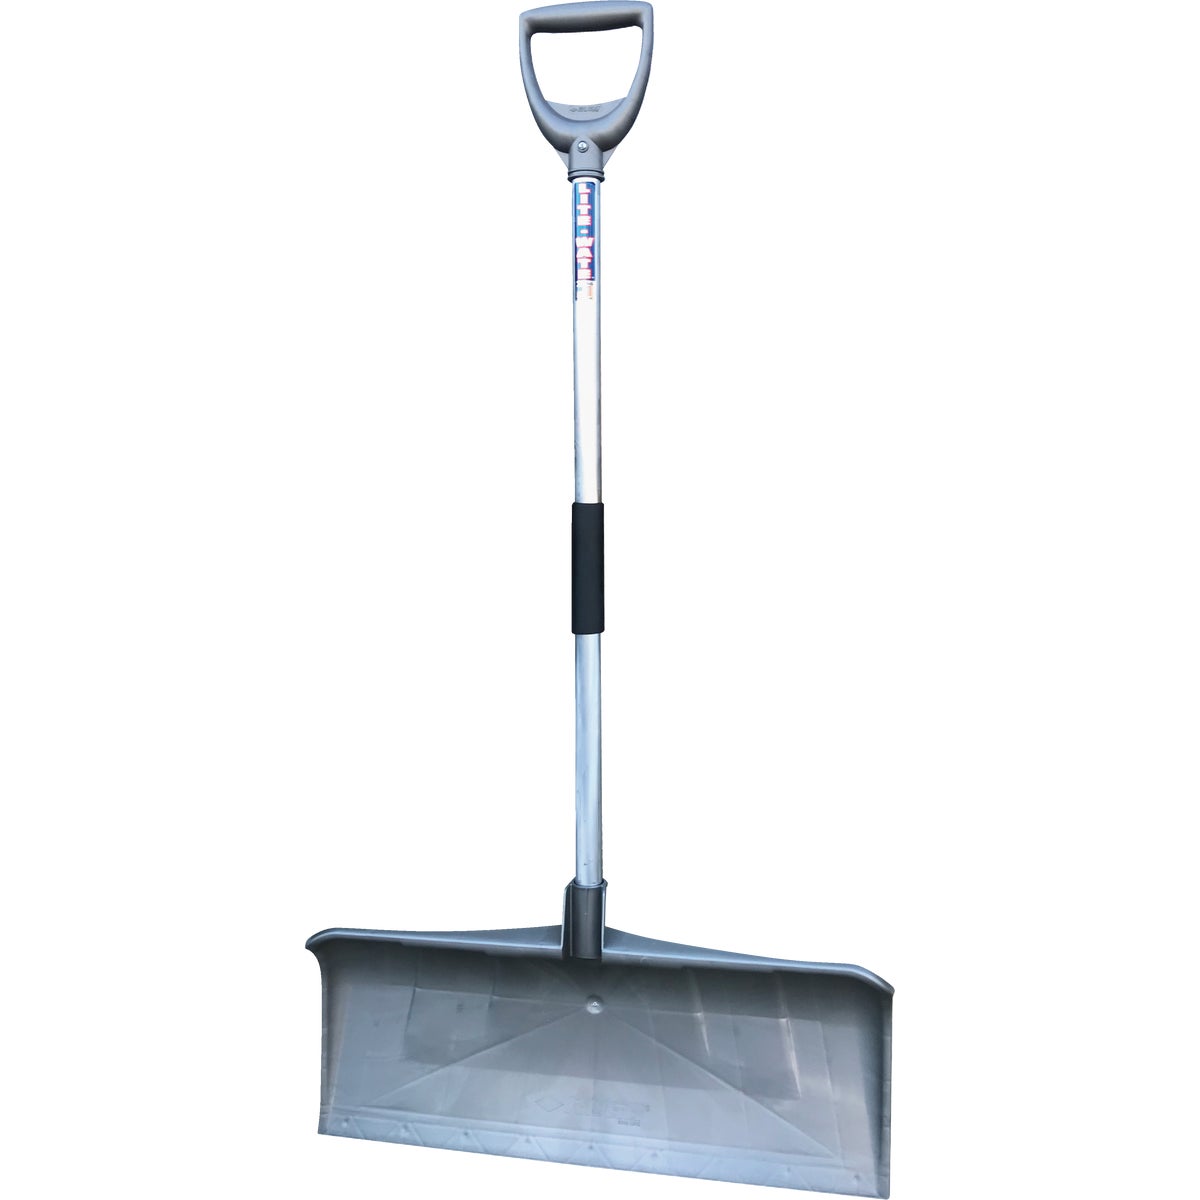 Item 705617, Lite-Wate snow pusher has a 27 In. poly pusher blade and 1.25 In.